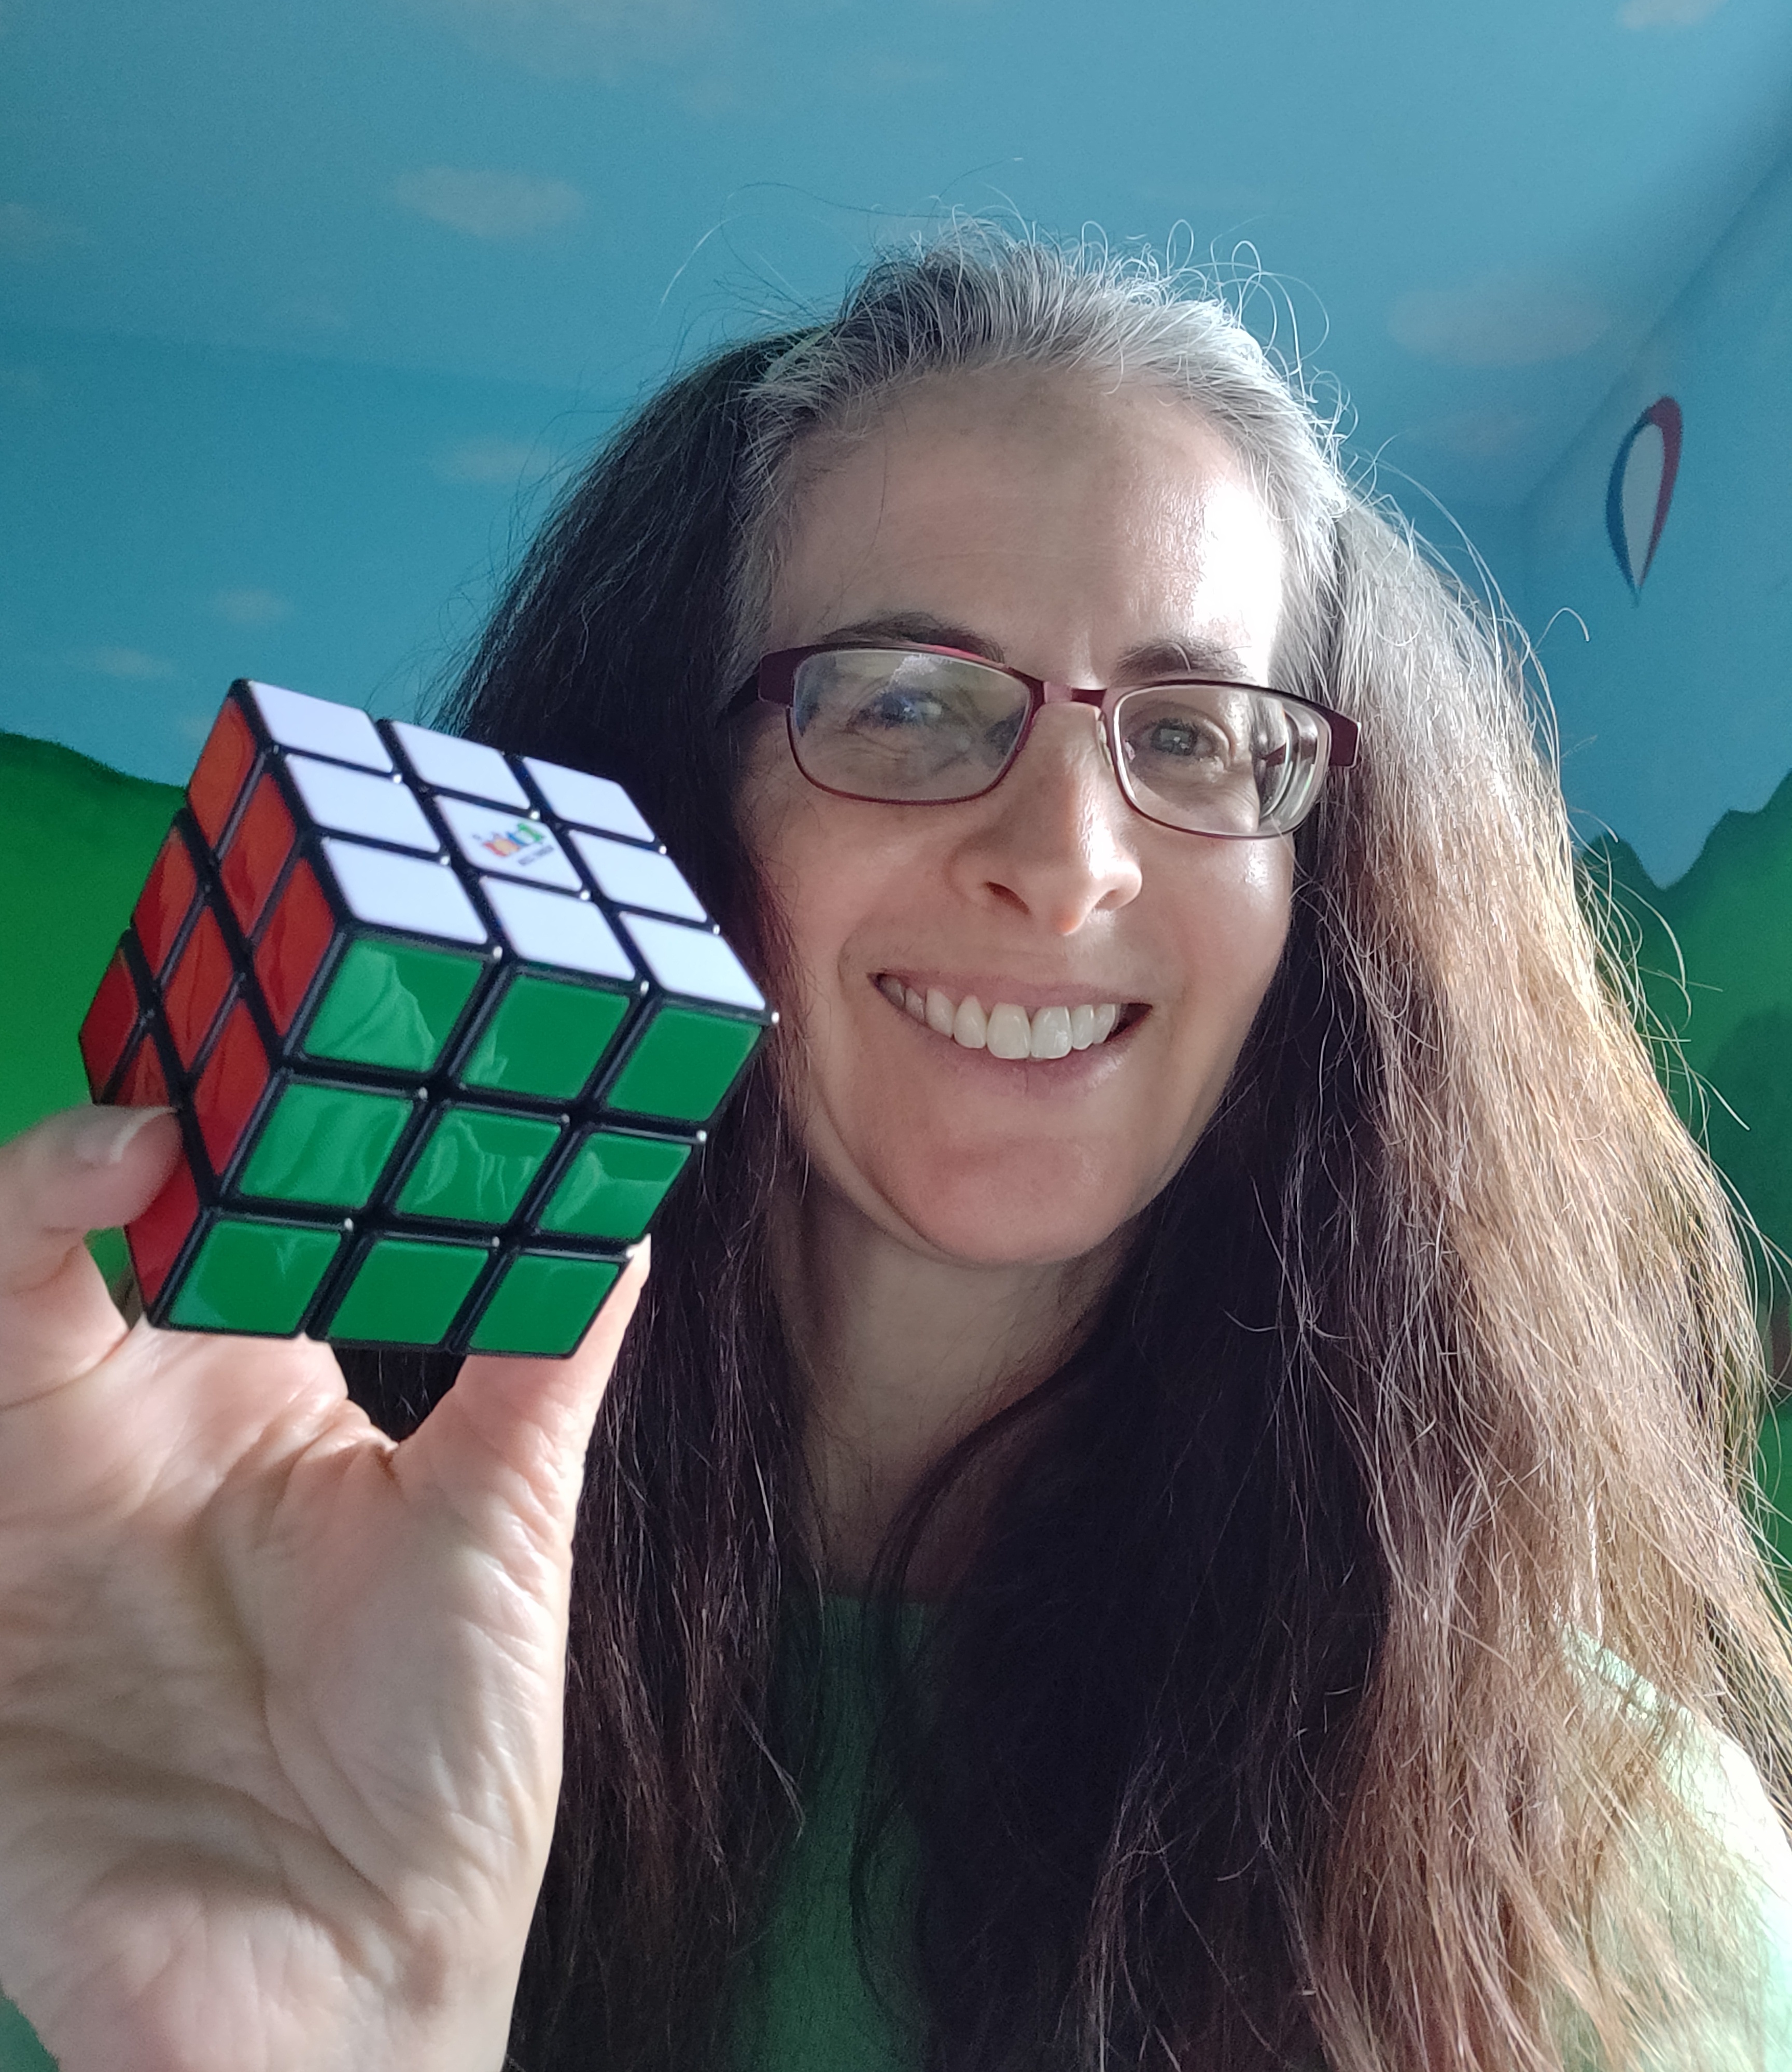 Success with the Rubik's Cube!